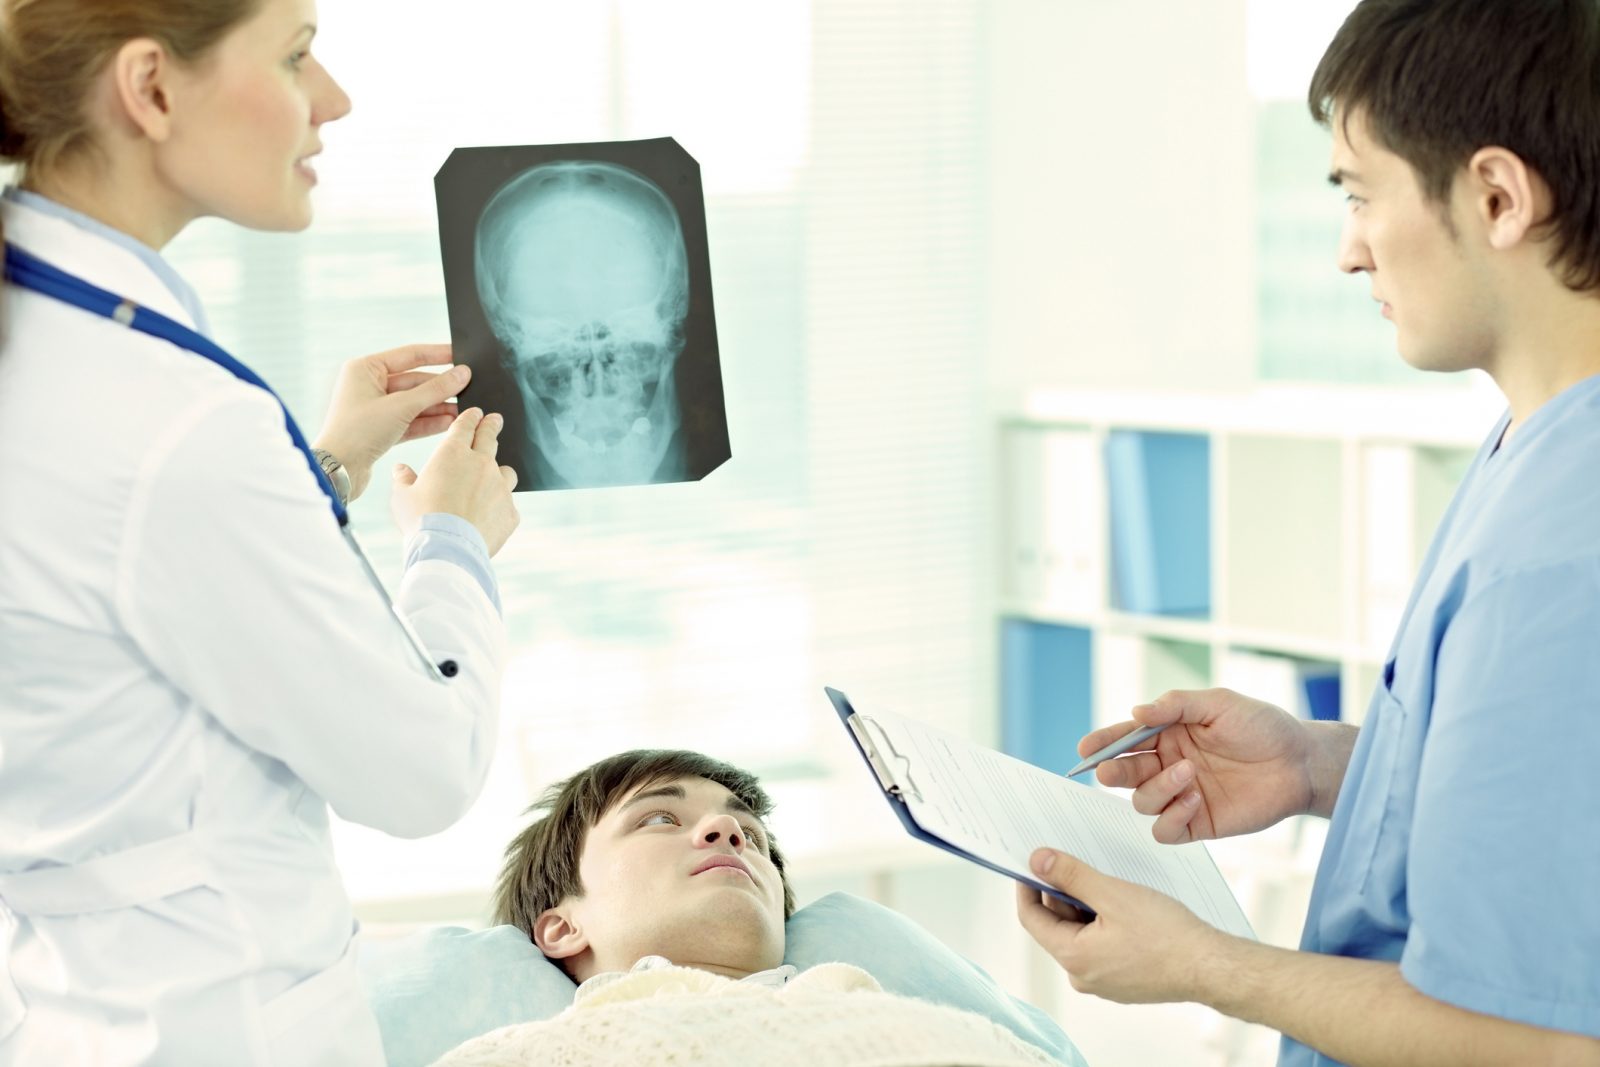 A man with brown hair is lying on a hospital bed looking up at a female medical health professional (left) holding an X-ray of a skull with a male medical professional (right) looking at the X-ray and holding a clipboard and pen.